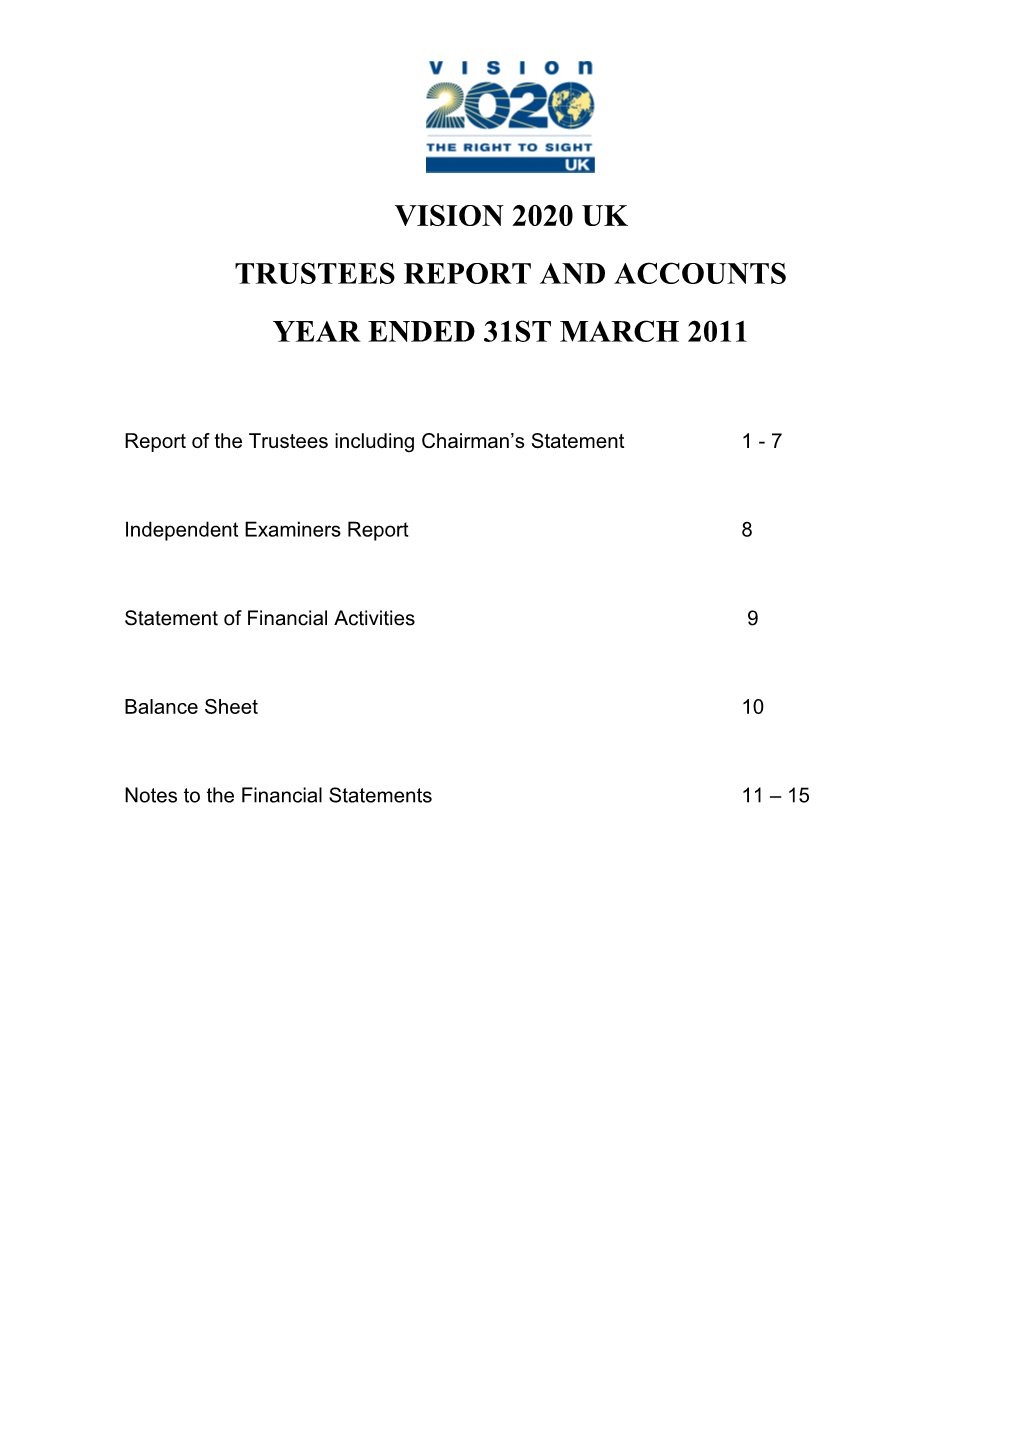 Trustees Report and Accounts